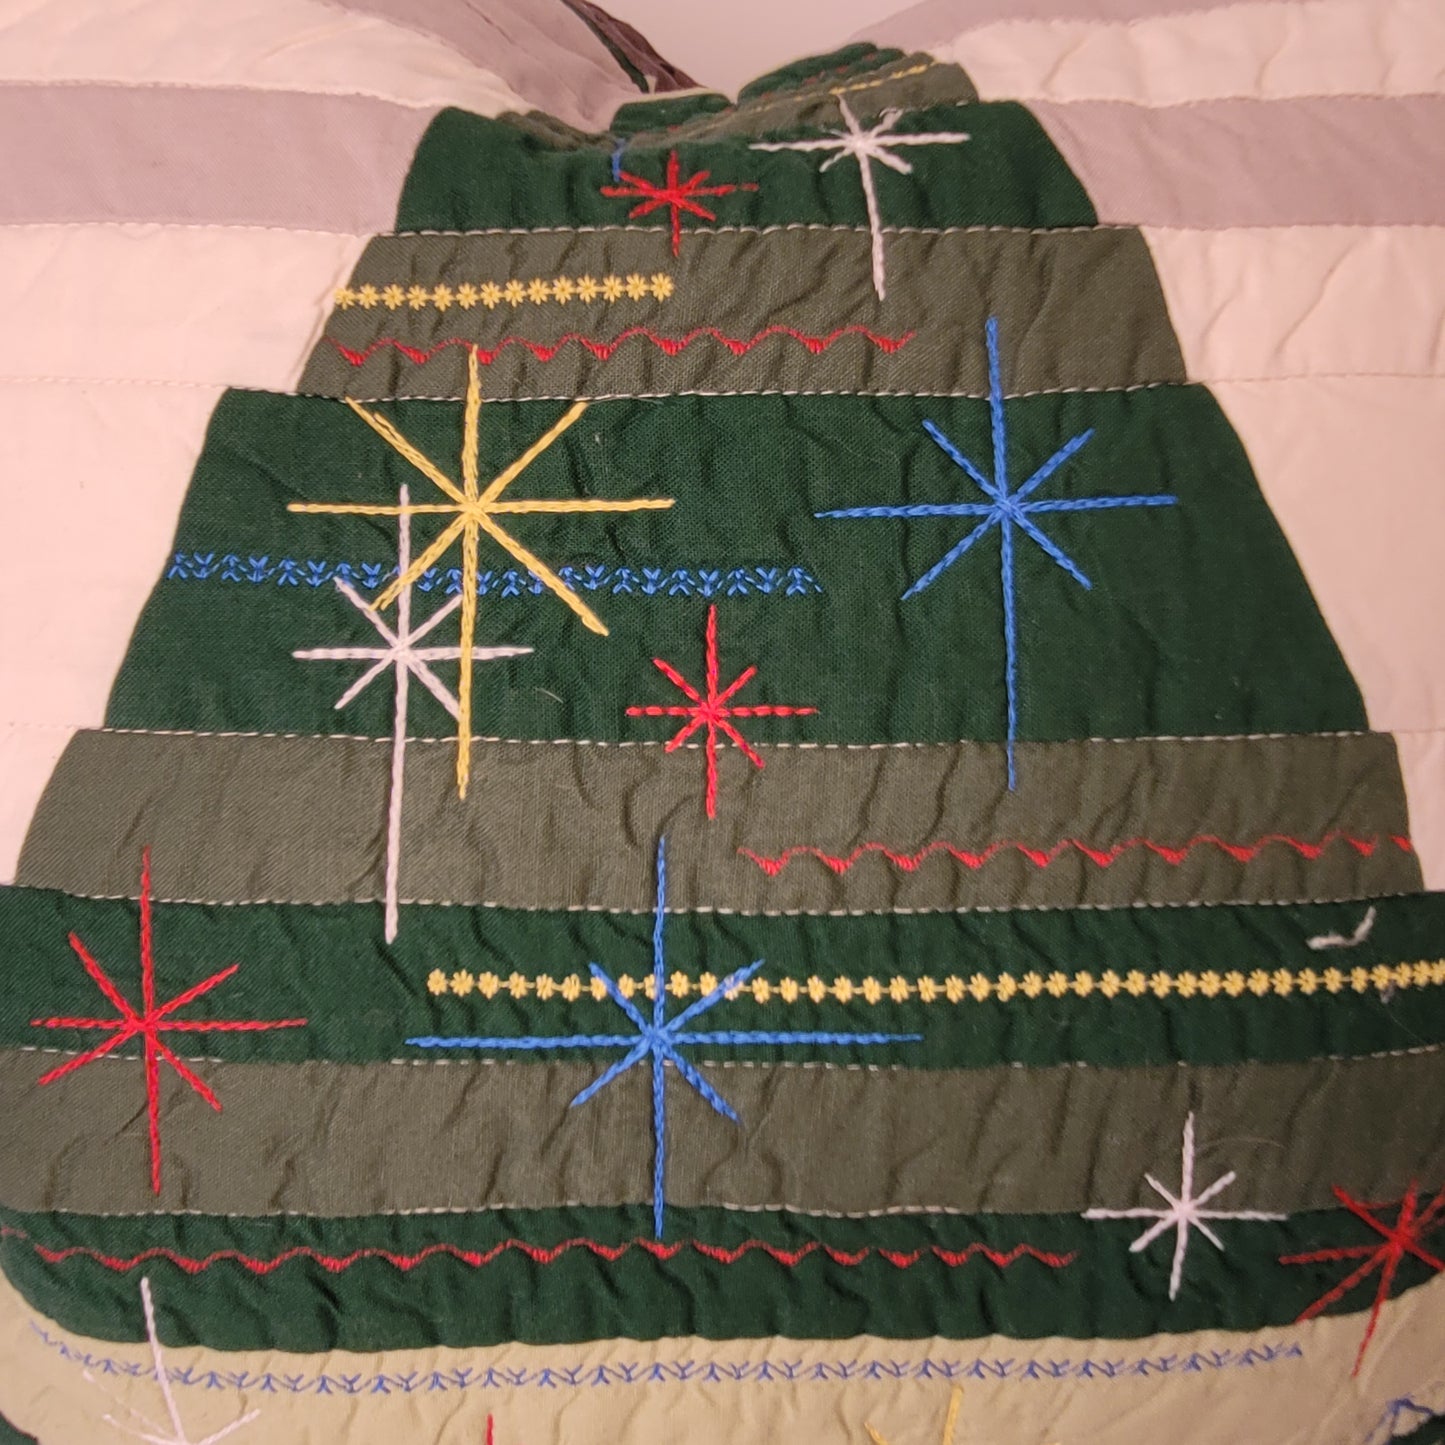 Quilted, Embroidered Mid-Century Kitsch Inspired Christmas Tree Pillow 22"